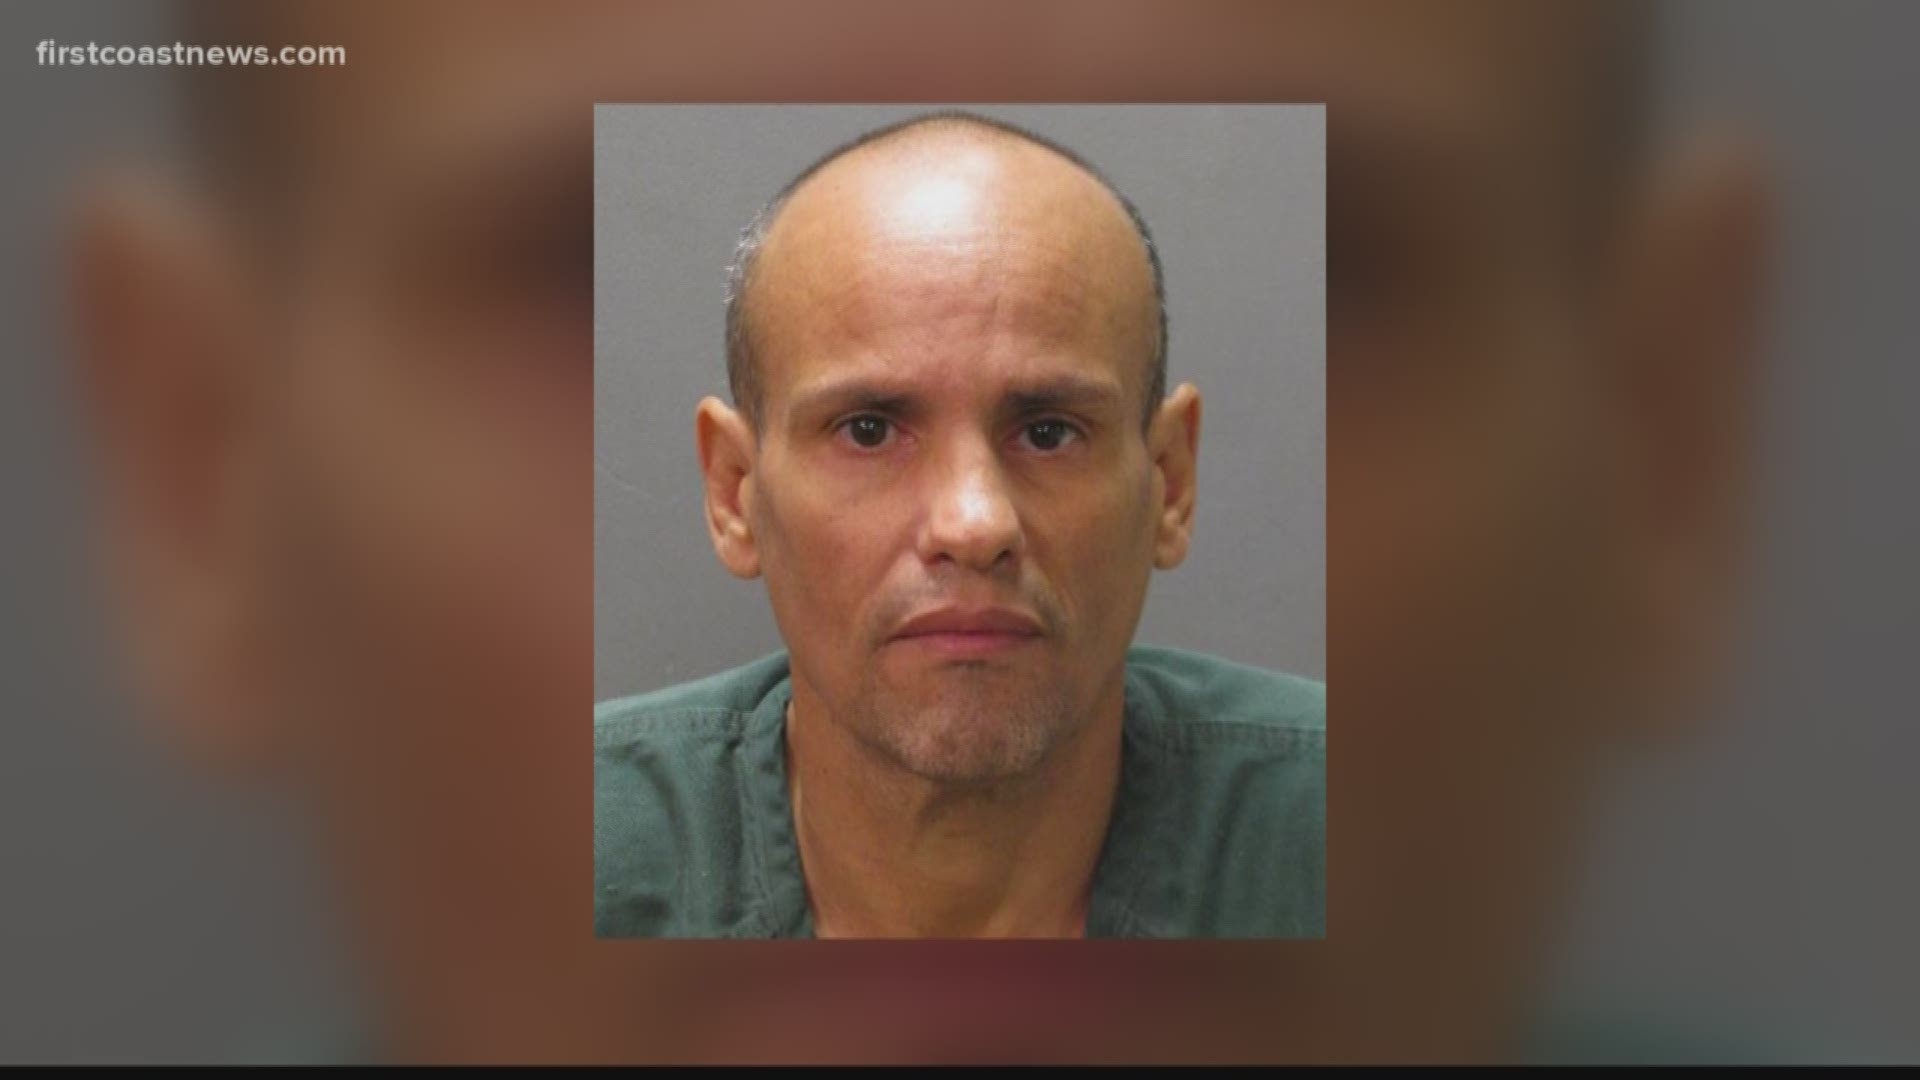 David Oseas Ramirez was charged with molesting a child under 12 years old back in 2012 and was sentenced to life in jail. He was killed by his cellmate Tuesday.